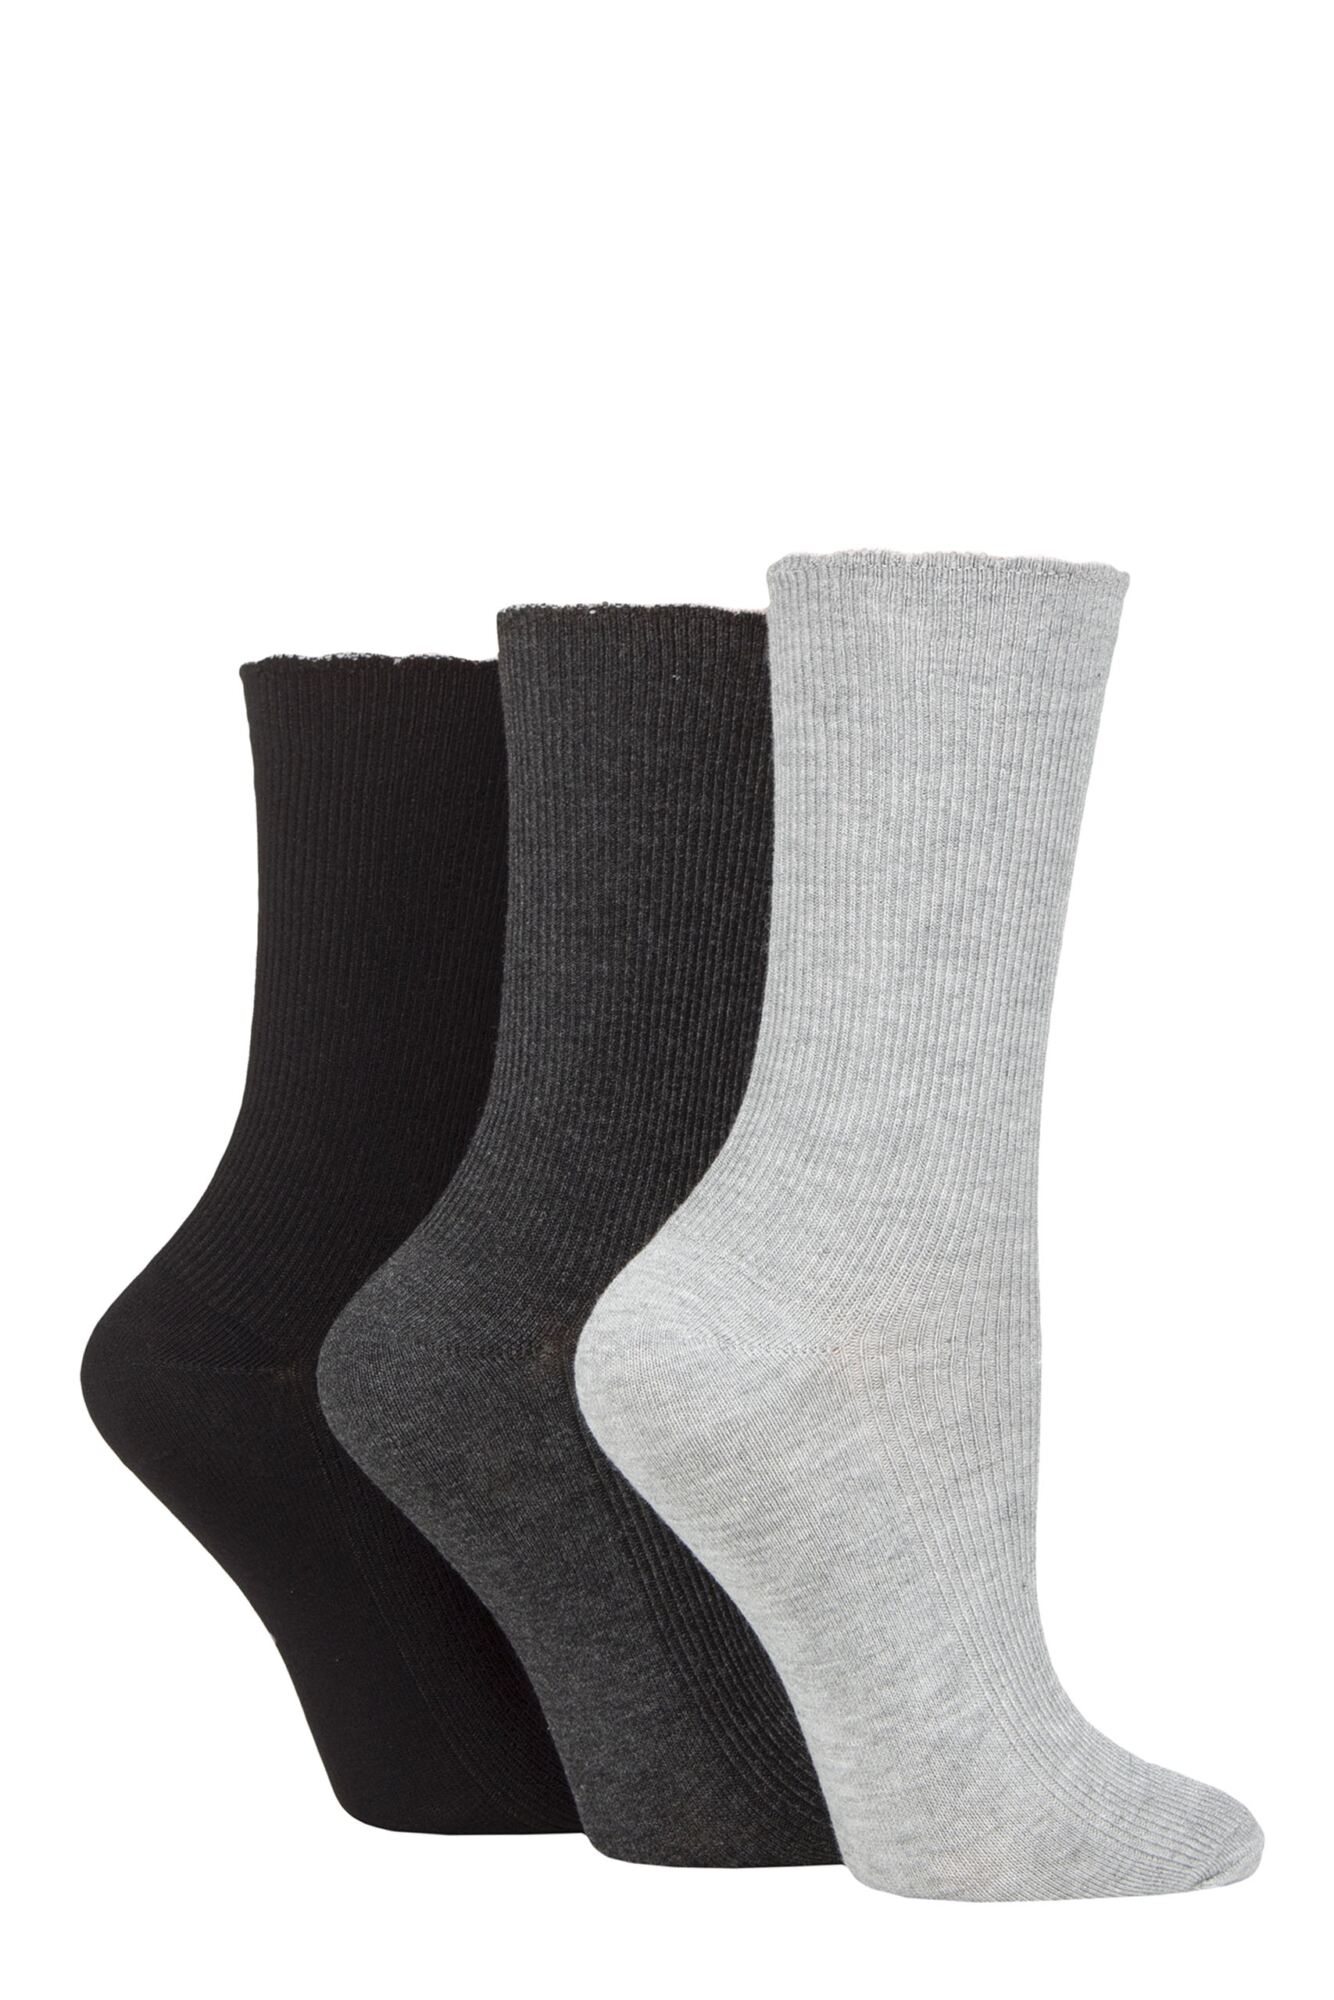 Ladies 3 Pair Elle Ribbed Bamboo Socks with Scallop Top from SockShop